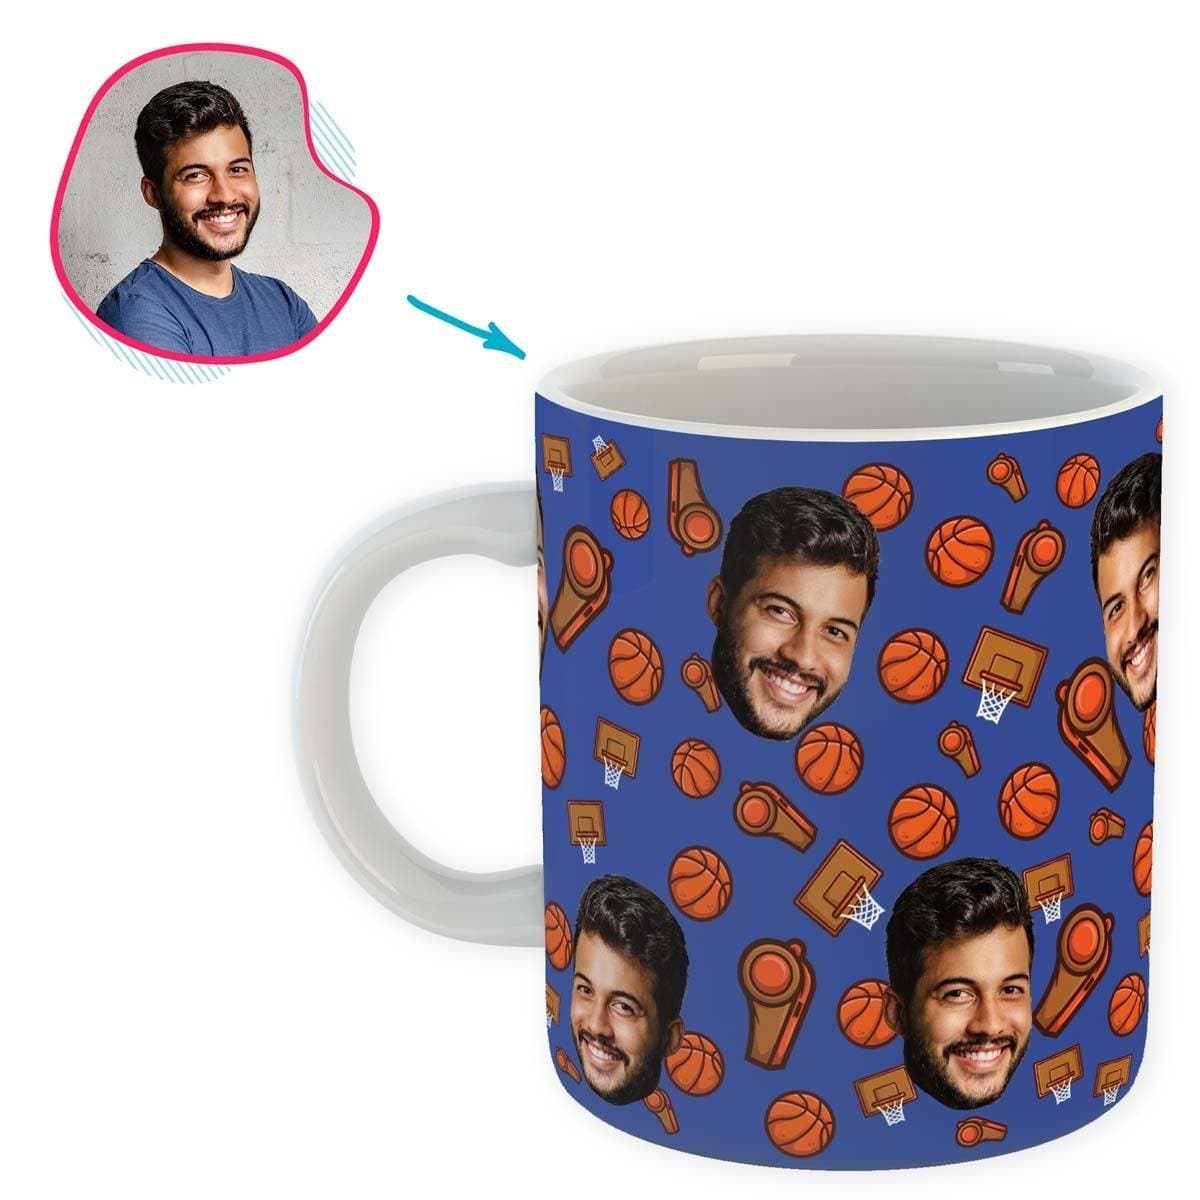 darkblue Basketball mug personalized with photo of face printed on it